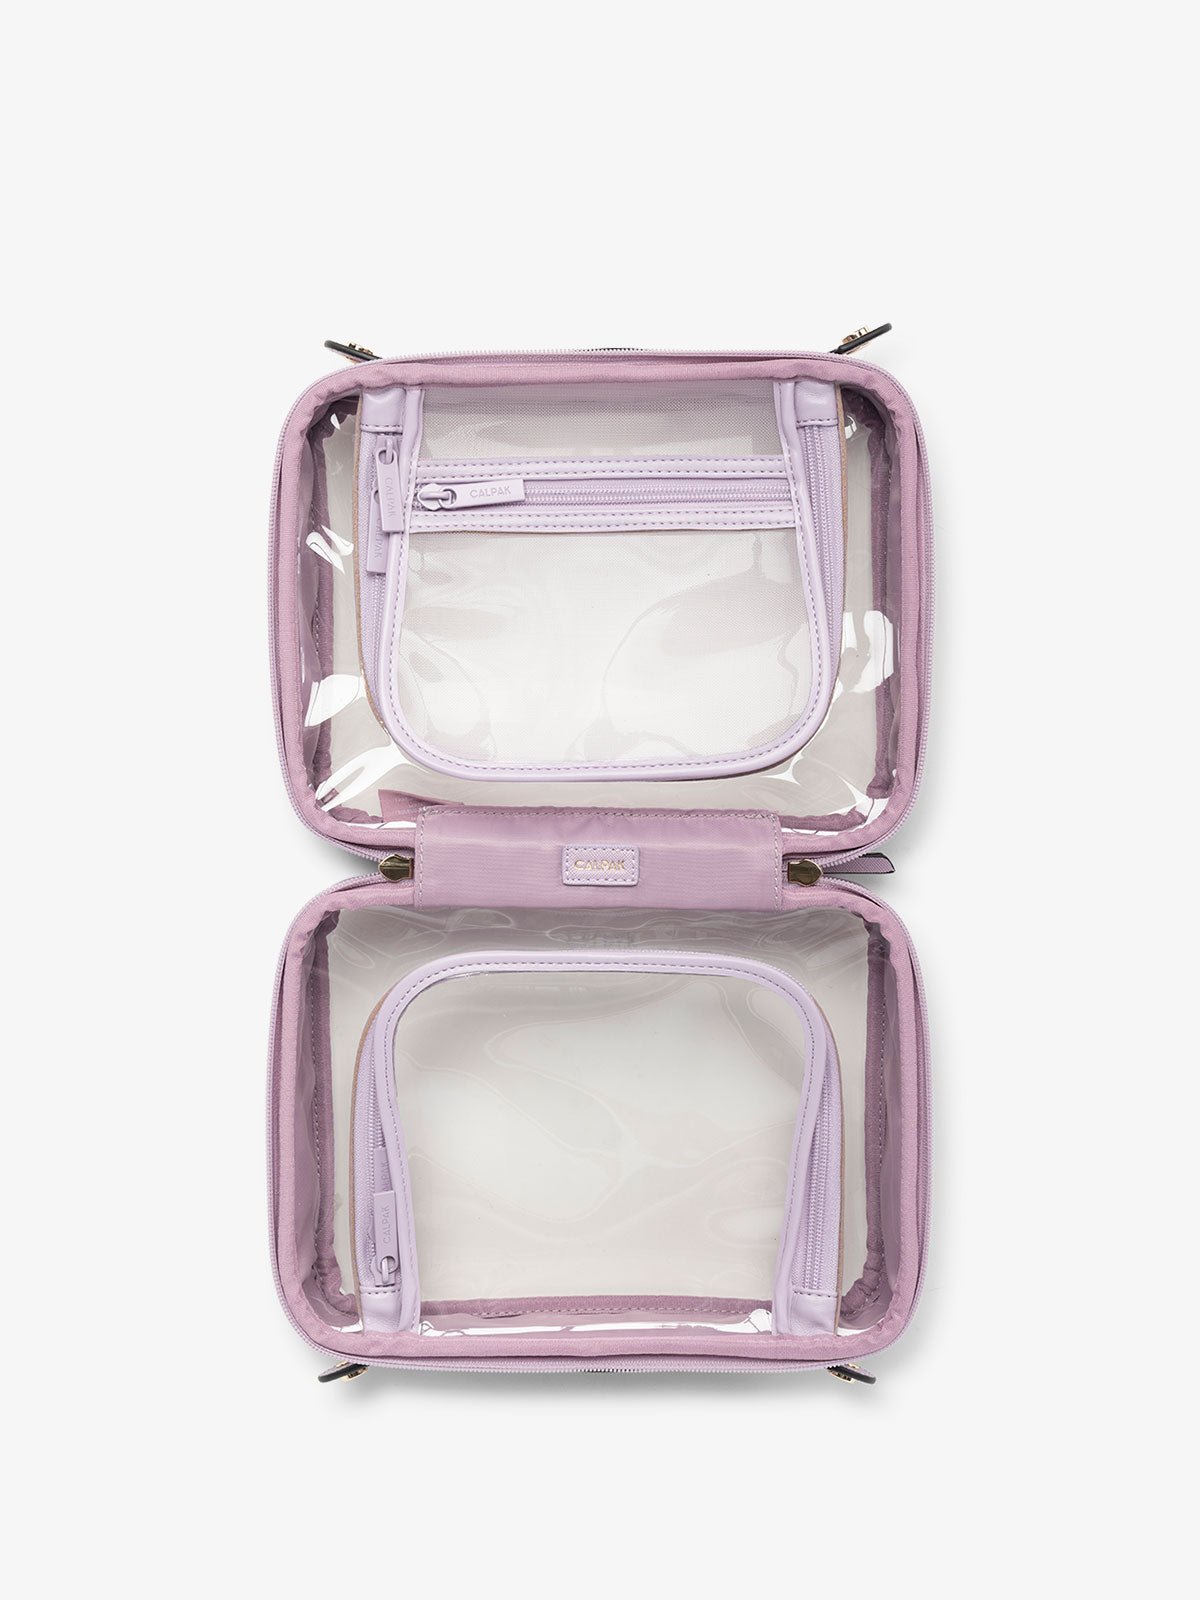 CALPAK  clear travel makeup bag with compartments in lavender